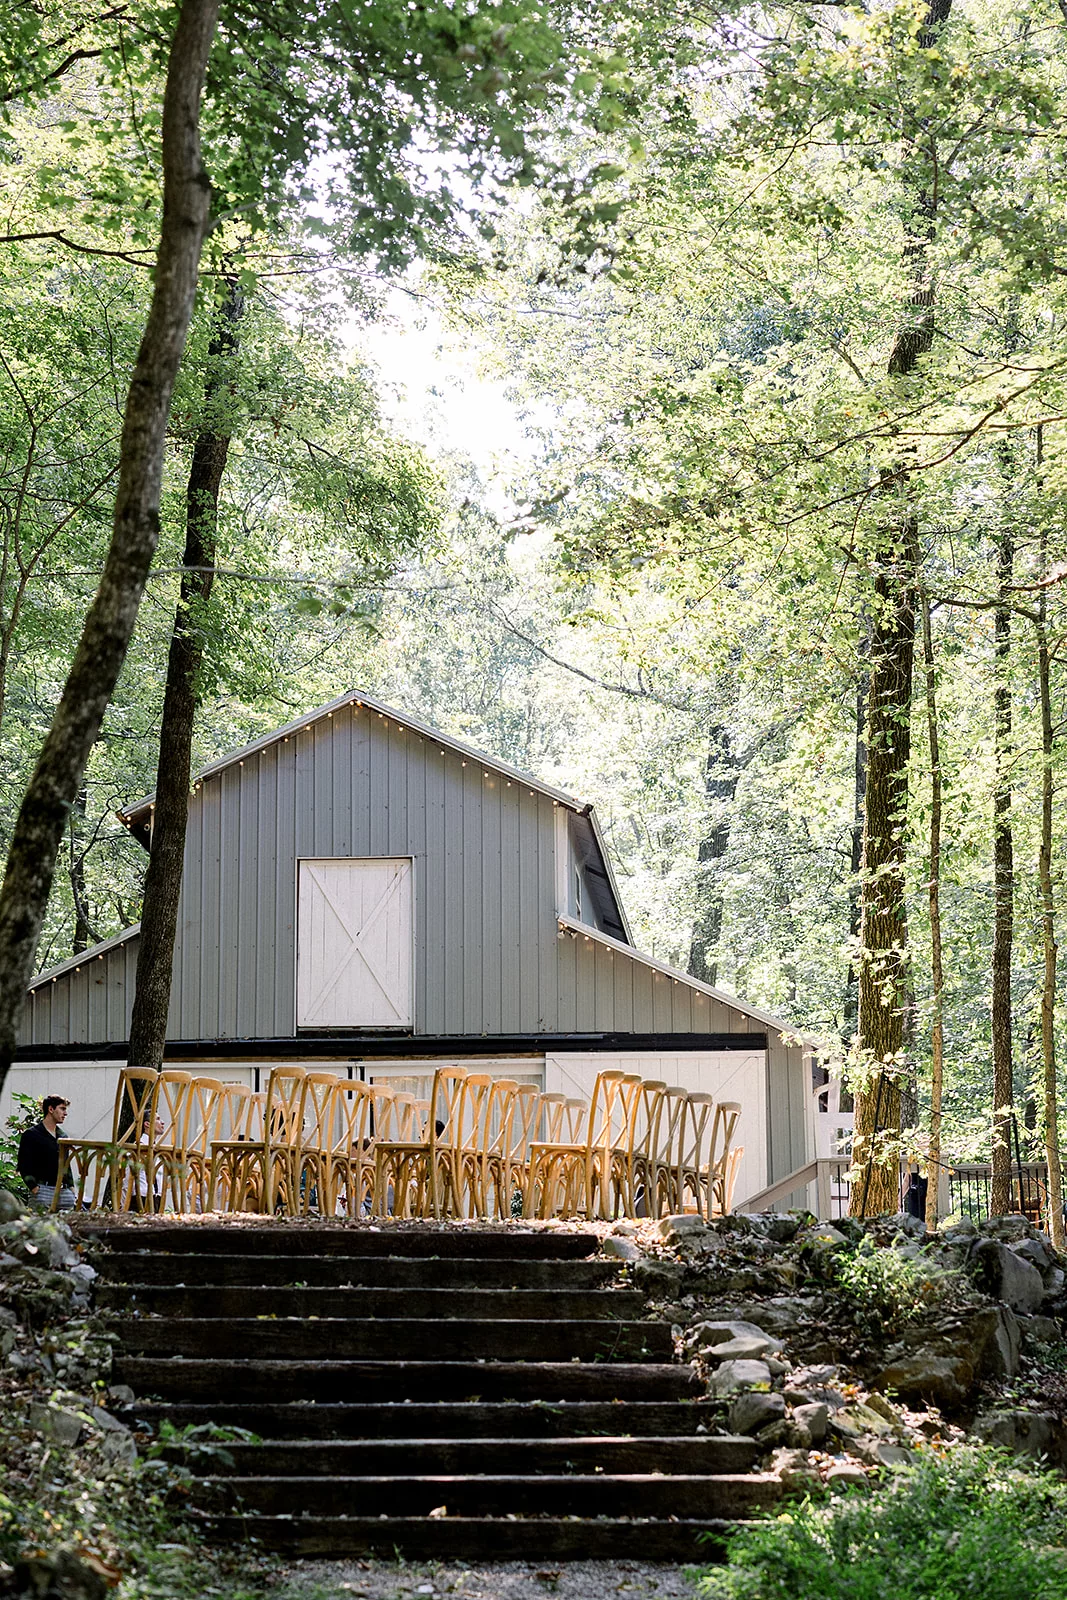 A Sustainable Wedding Venue in the forest set up for an outdoor wedding reception